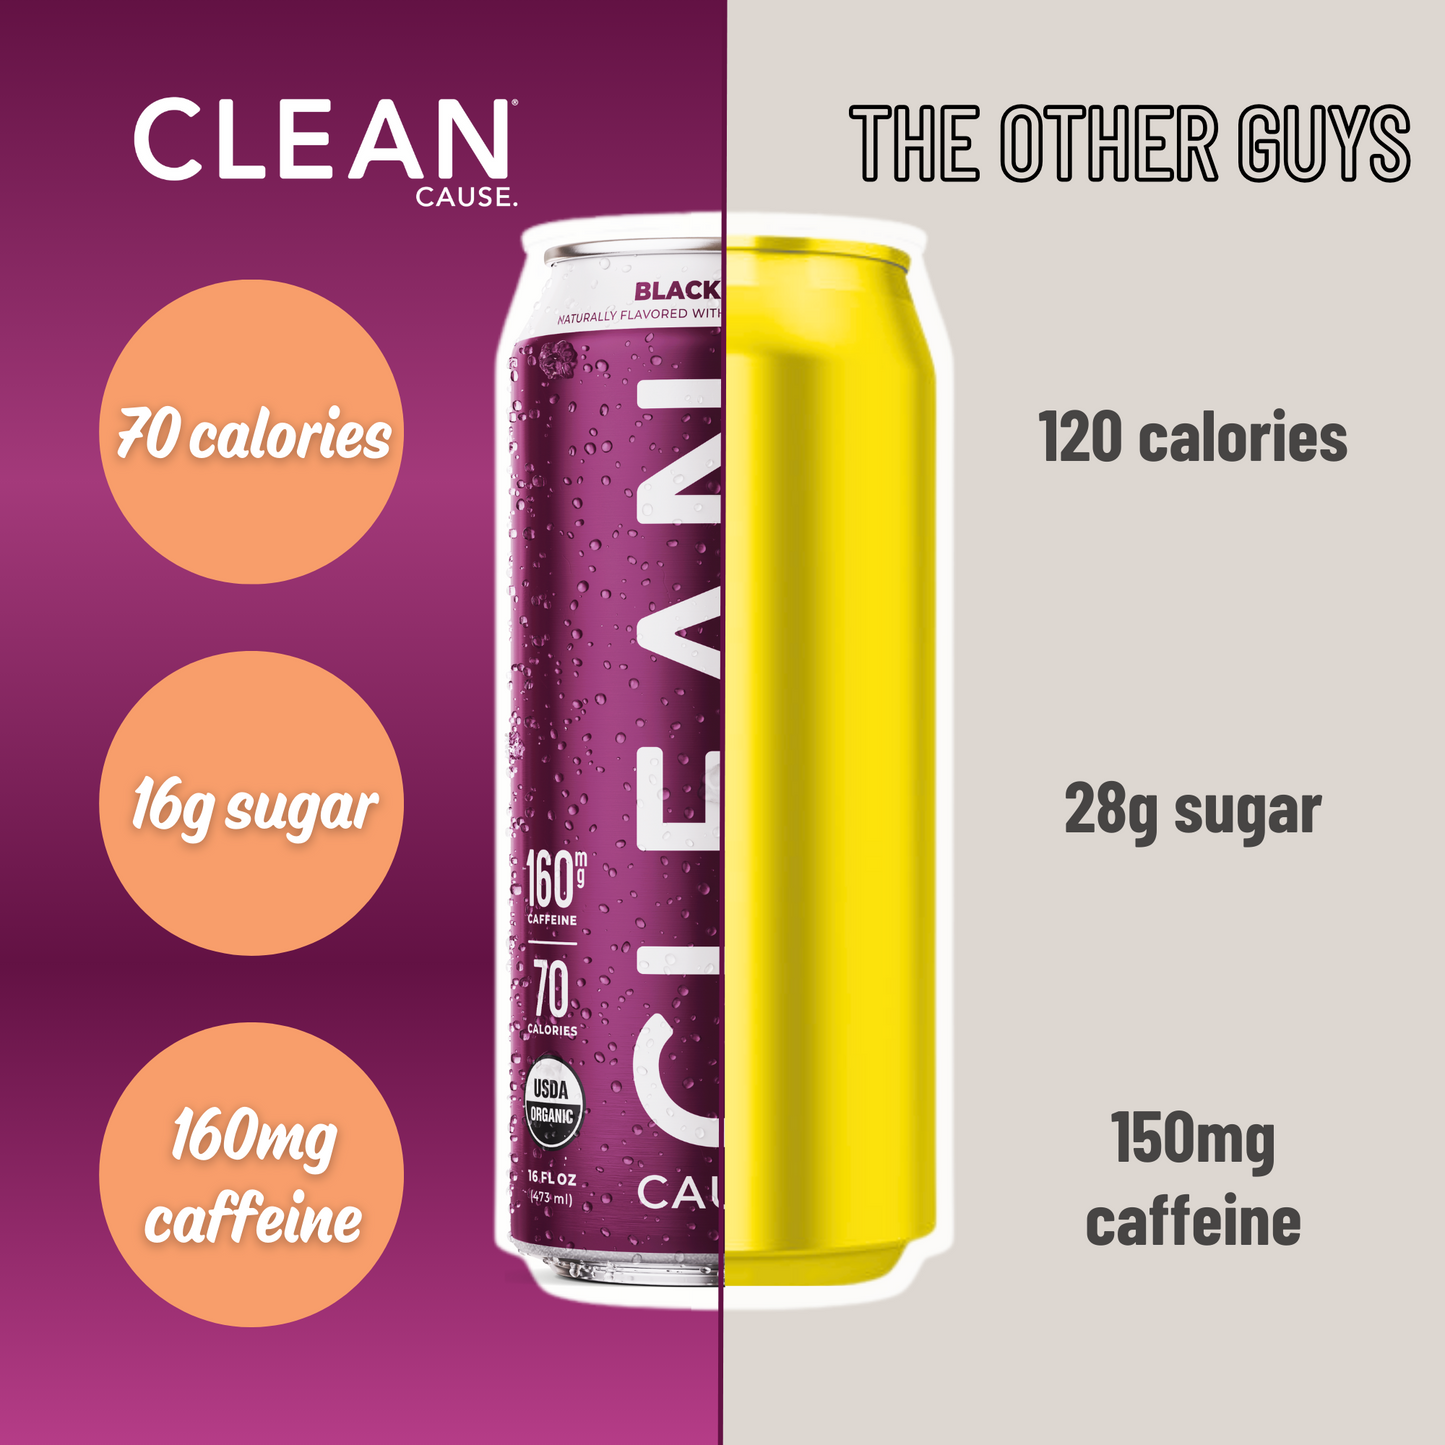 A can split between CLEAN Blackberry Yerba Mate and "The Other Guys" showing CLEAN with 70 calories, 16g sugar, and 160mg caffeine and the other guys with 120 calories, 28g sugar, and 150mg caffeine